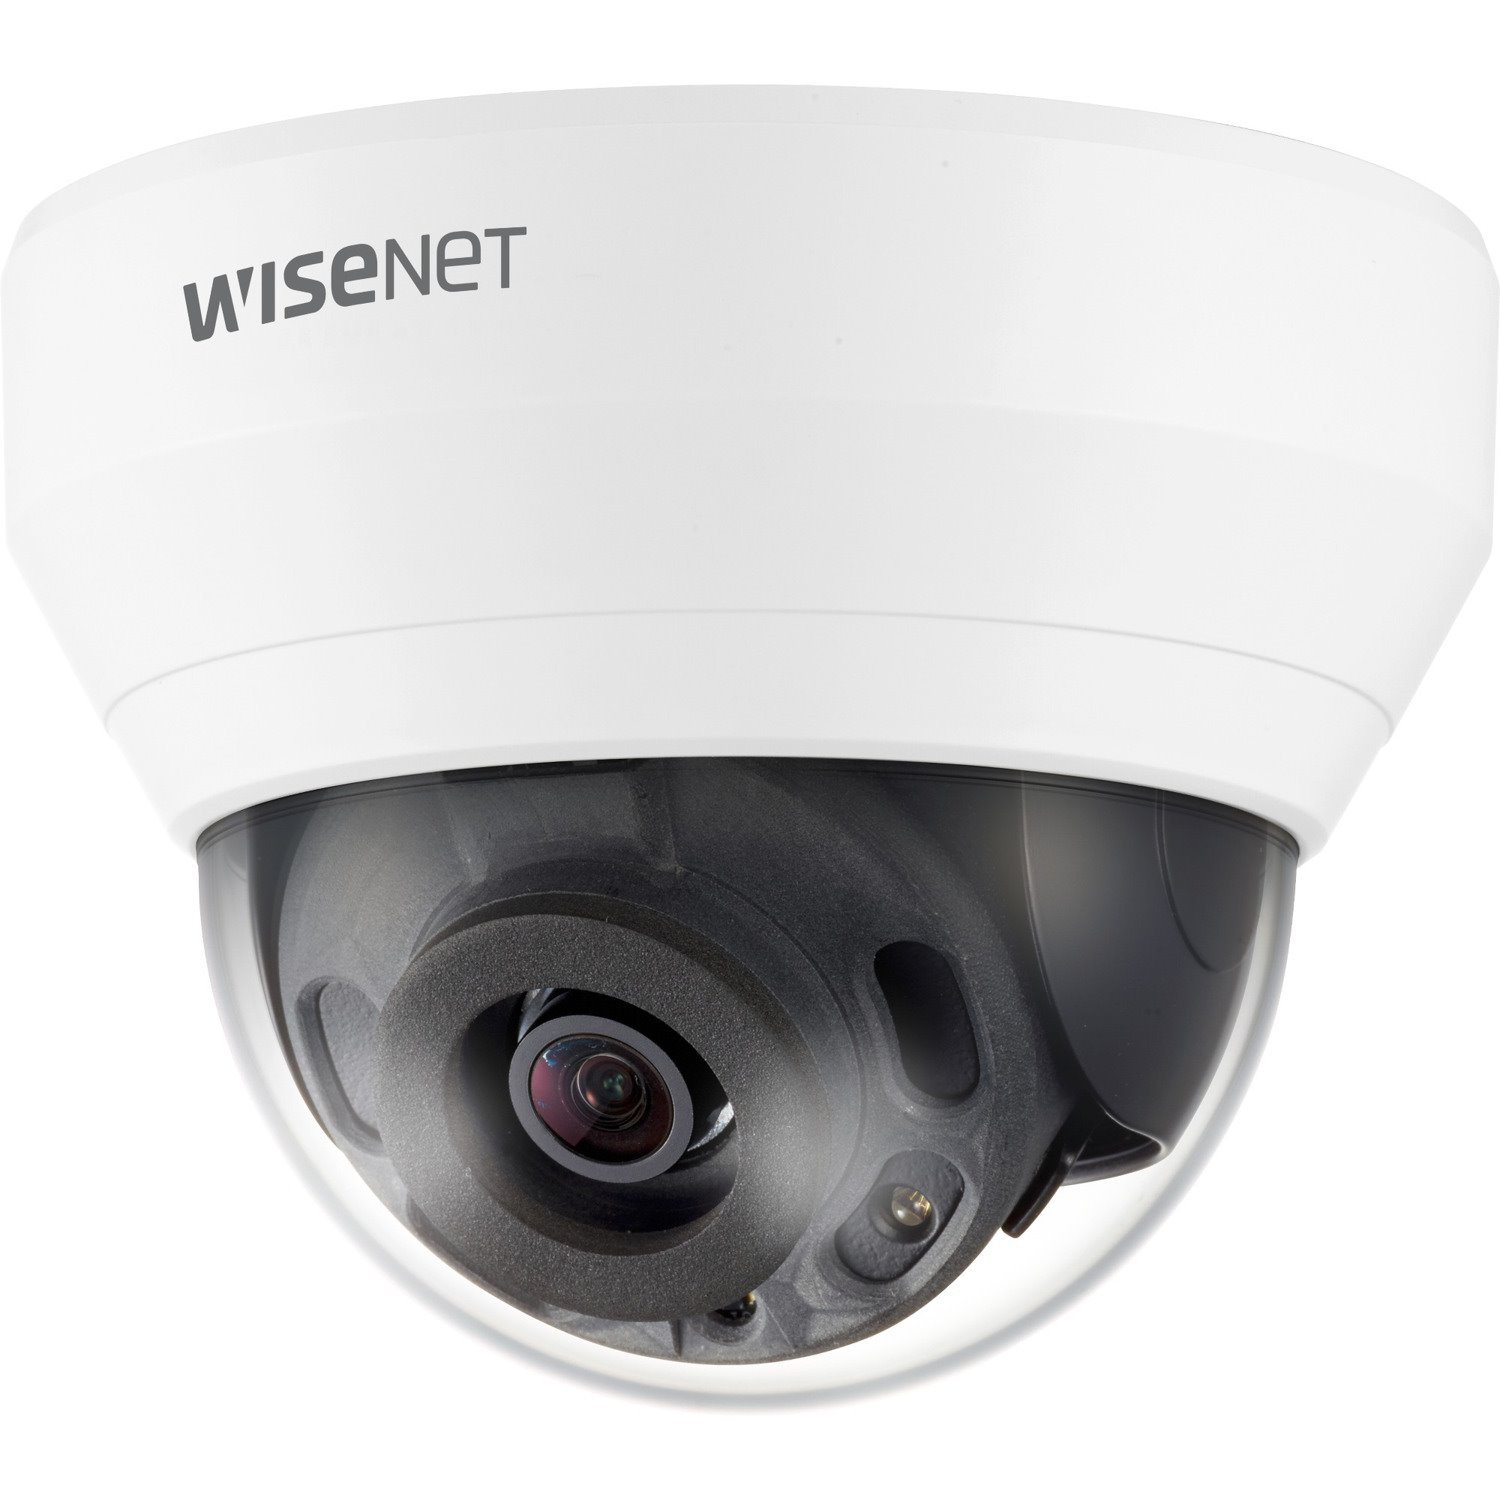 Wisenet QND-6022R 2 Megapixel Indoor Full HD Network Camera - Color, Monochrome - Dome - White